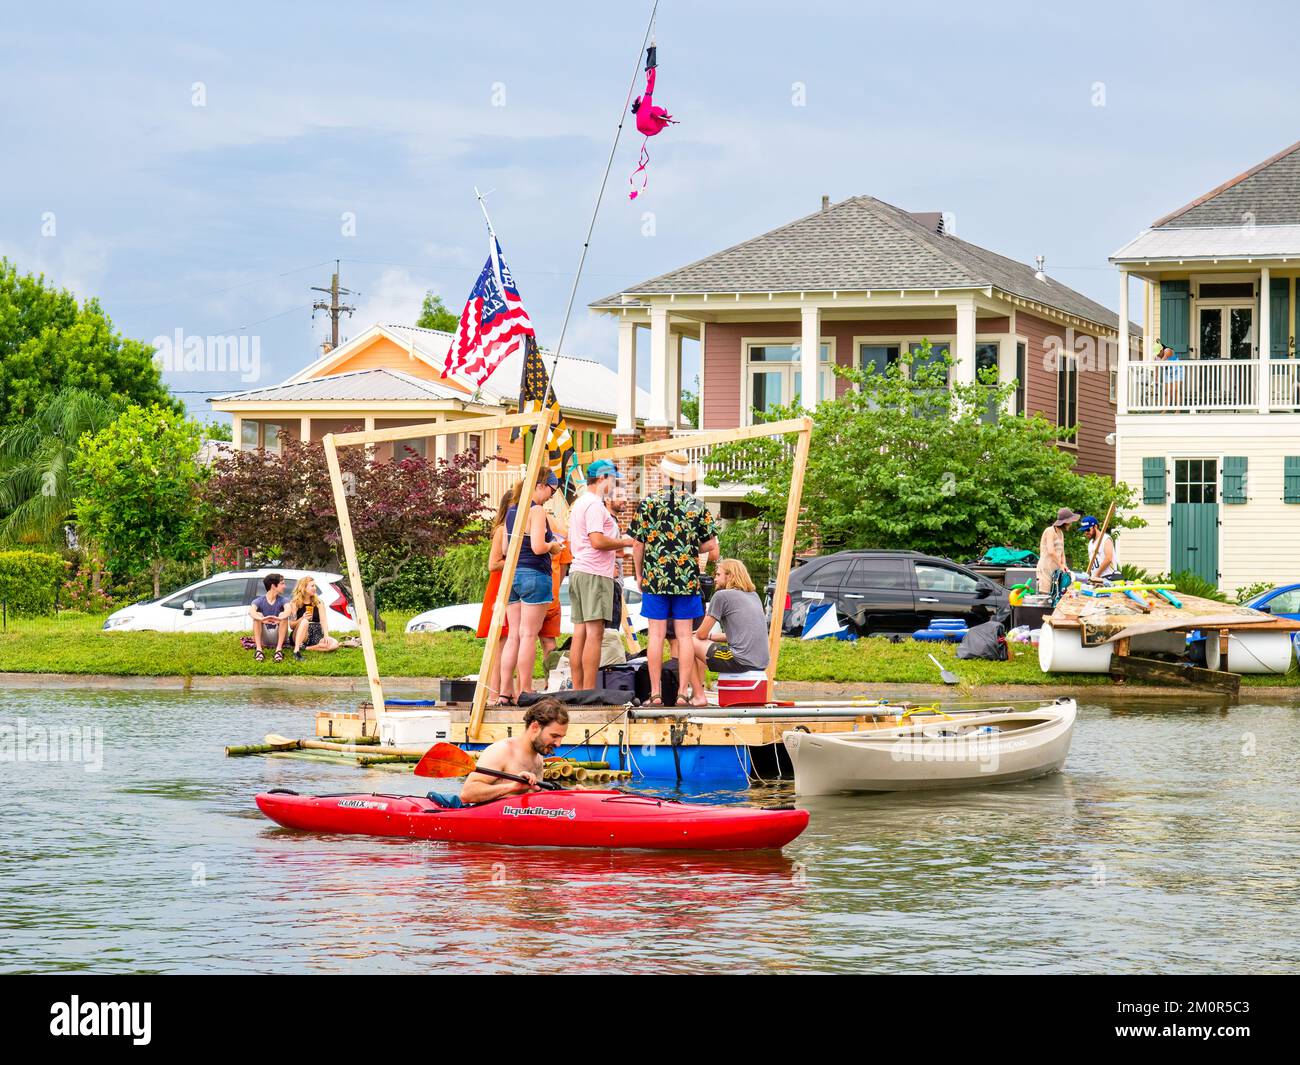 NEW ORLEANS, LA, USA - MAY 21, 2017: Young adults partying on Bayou St. John on boats and along the shoreline during the free Bayou Boogaloo Festival Stock Photo